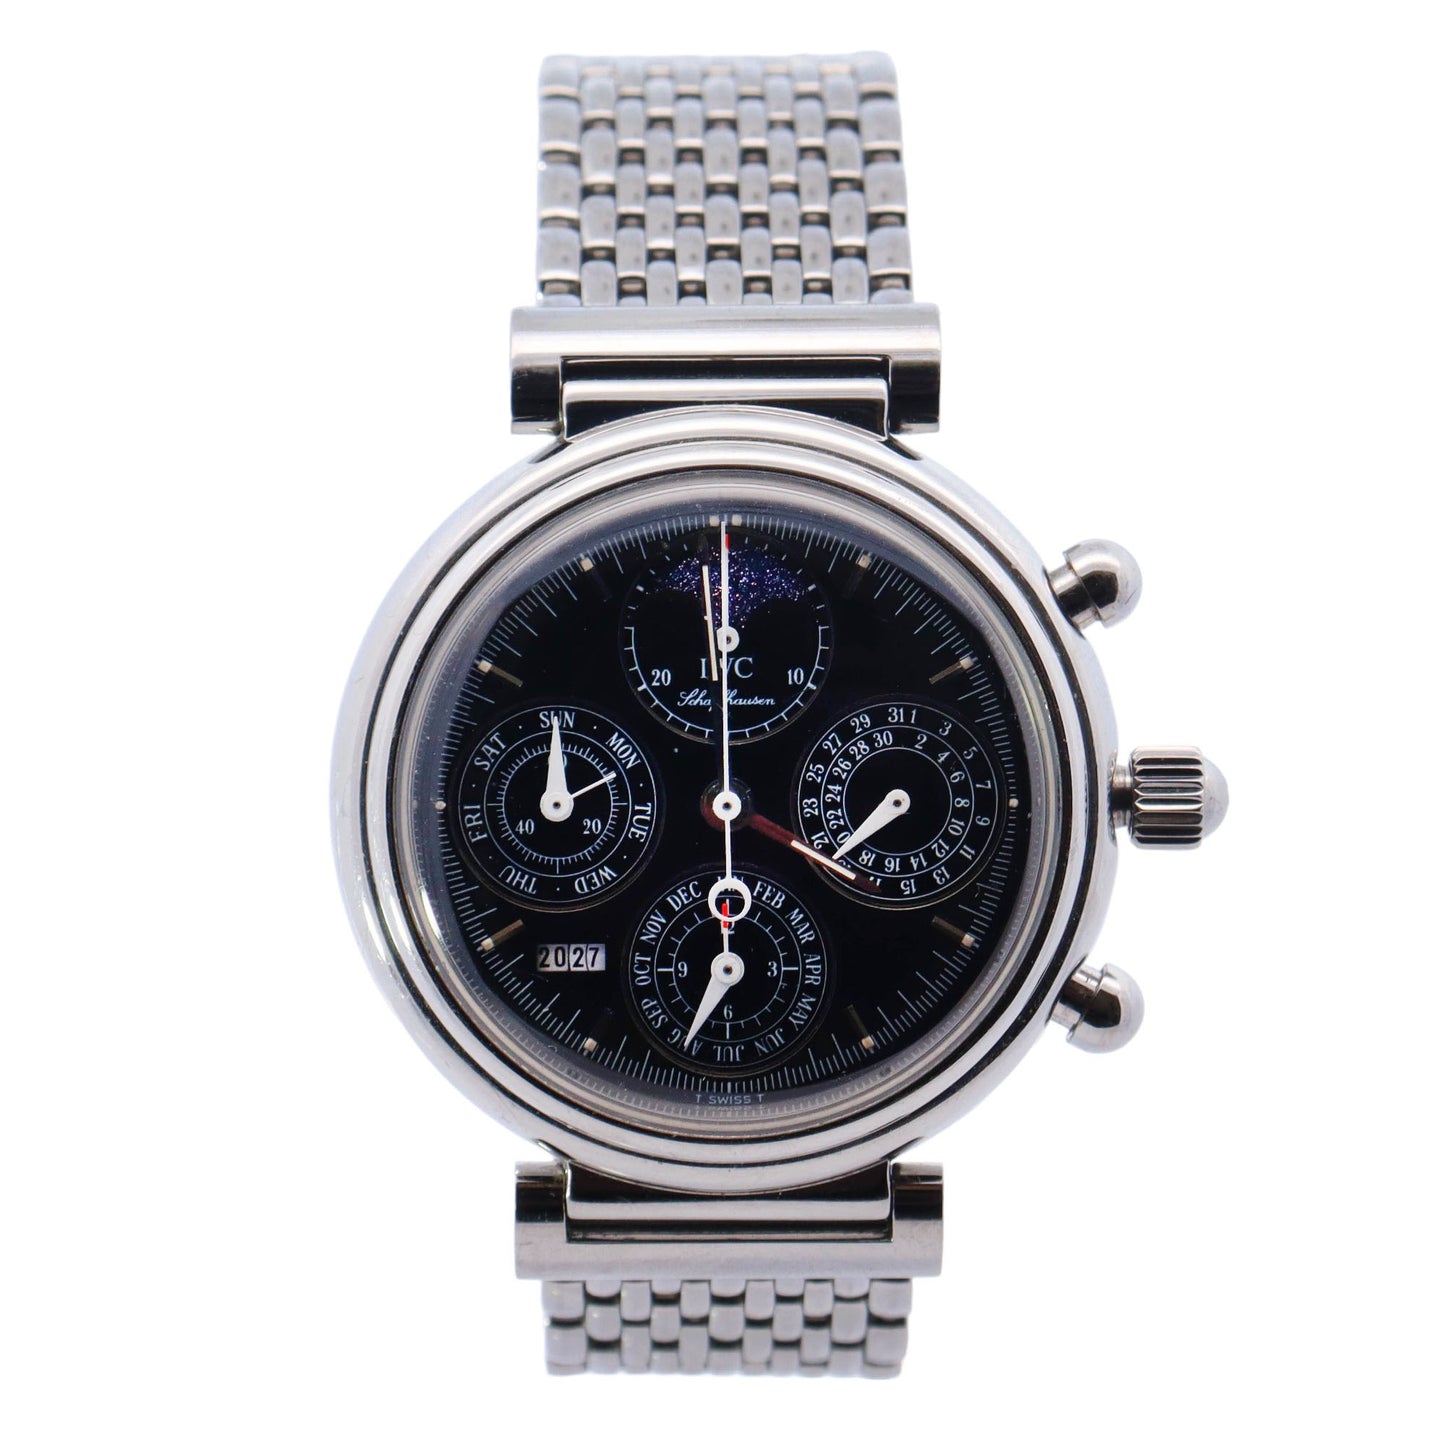 IWC Da Vinci Perpetual Chronograph Stainless Steel 39mm Black Chronograph Dial Watch Reference# IW375030 - Happy Jewelers Fine Jewelry Lifetime Warranty